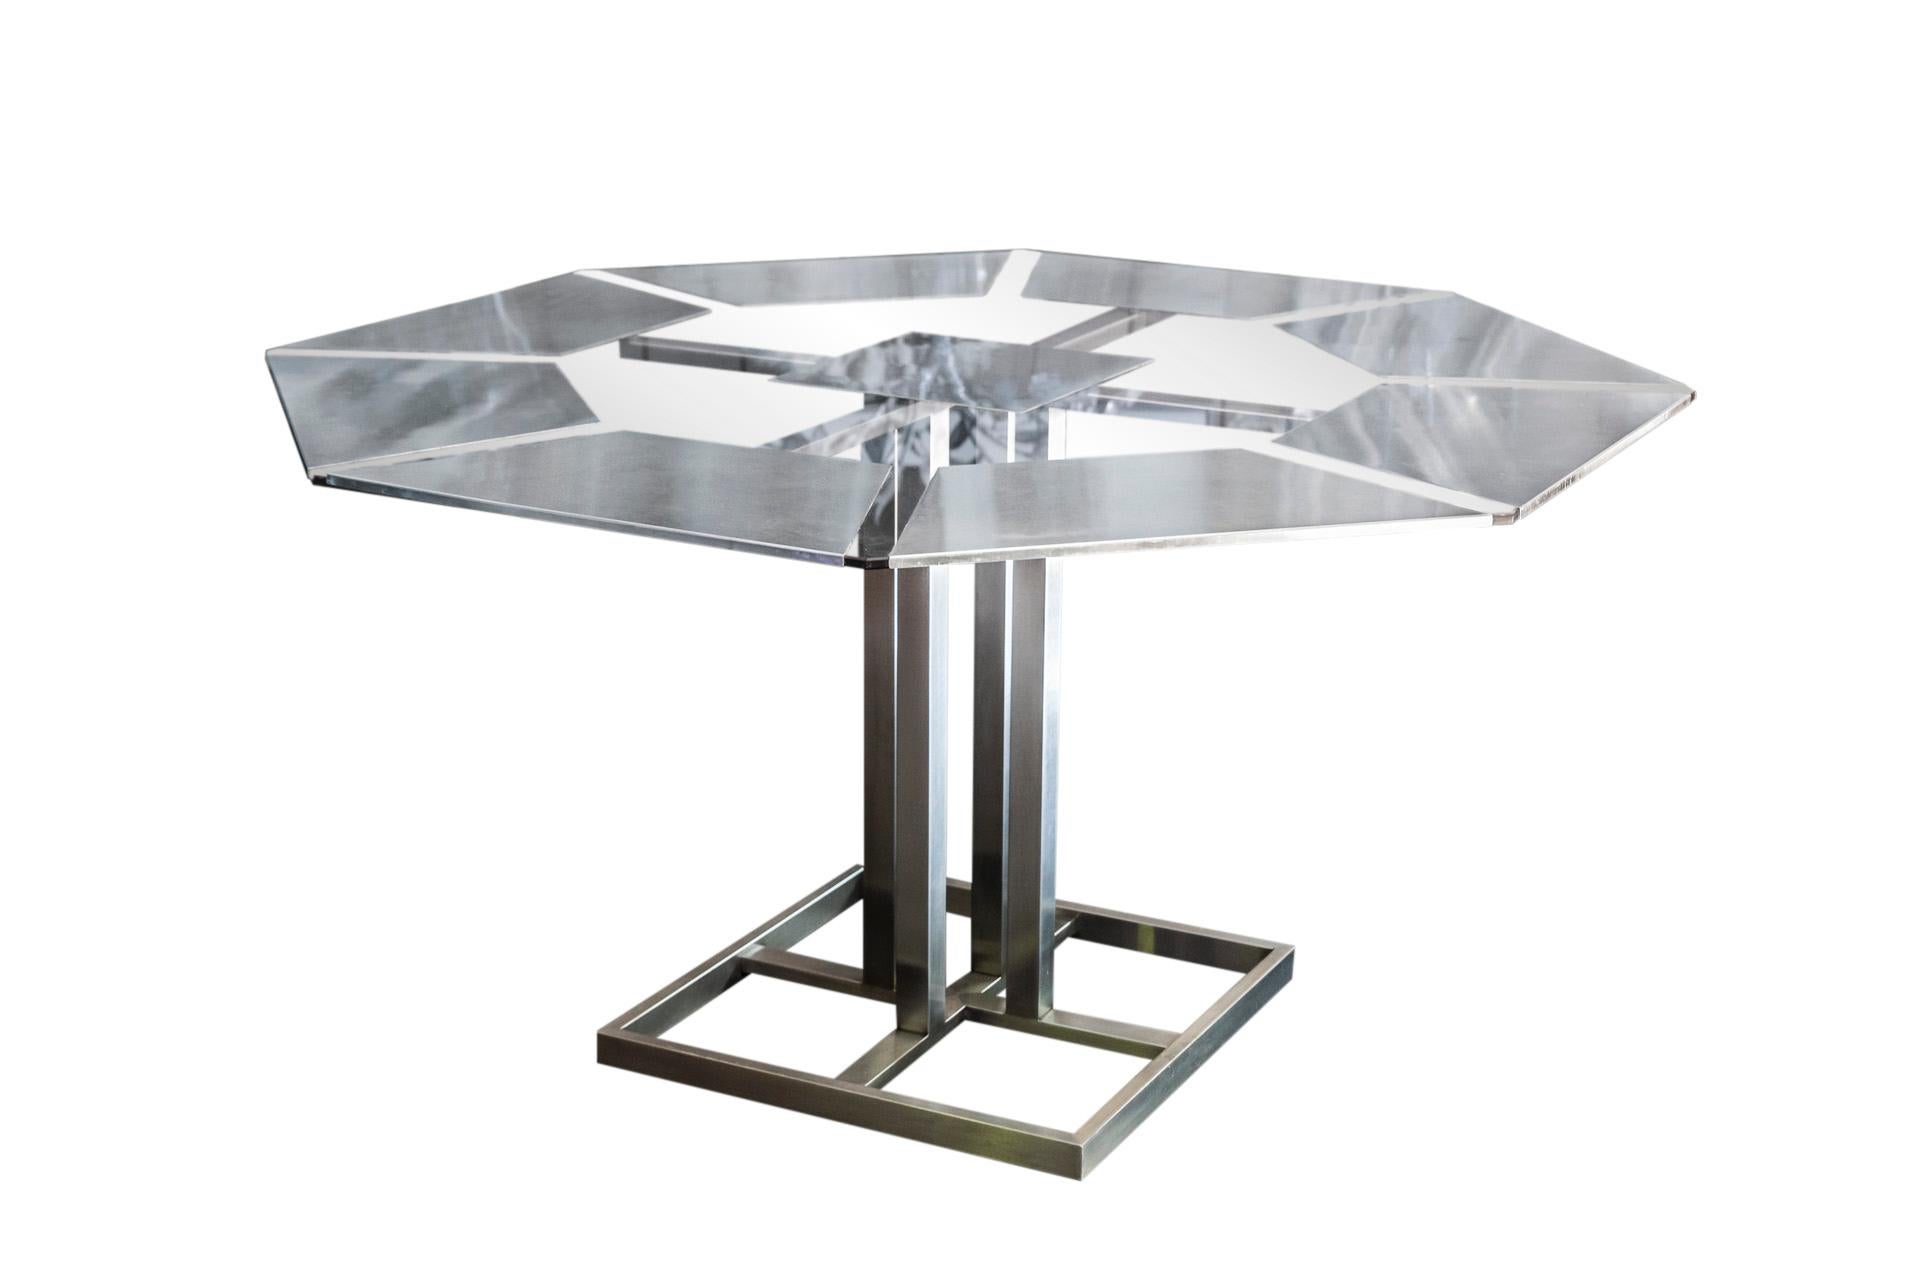 Nadine Charteret, 
Dining table, 
Inox and glass, octogonal glass tabletop with metal inclusions,
France, circa 1970.

Measures: Diameter 140 cm, height 74 cm.